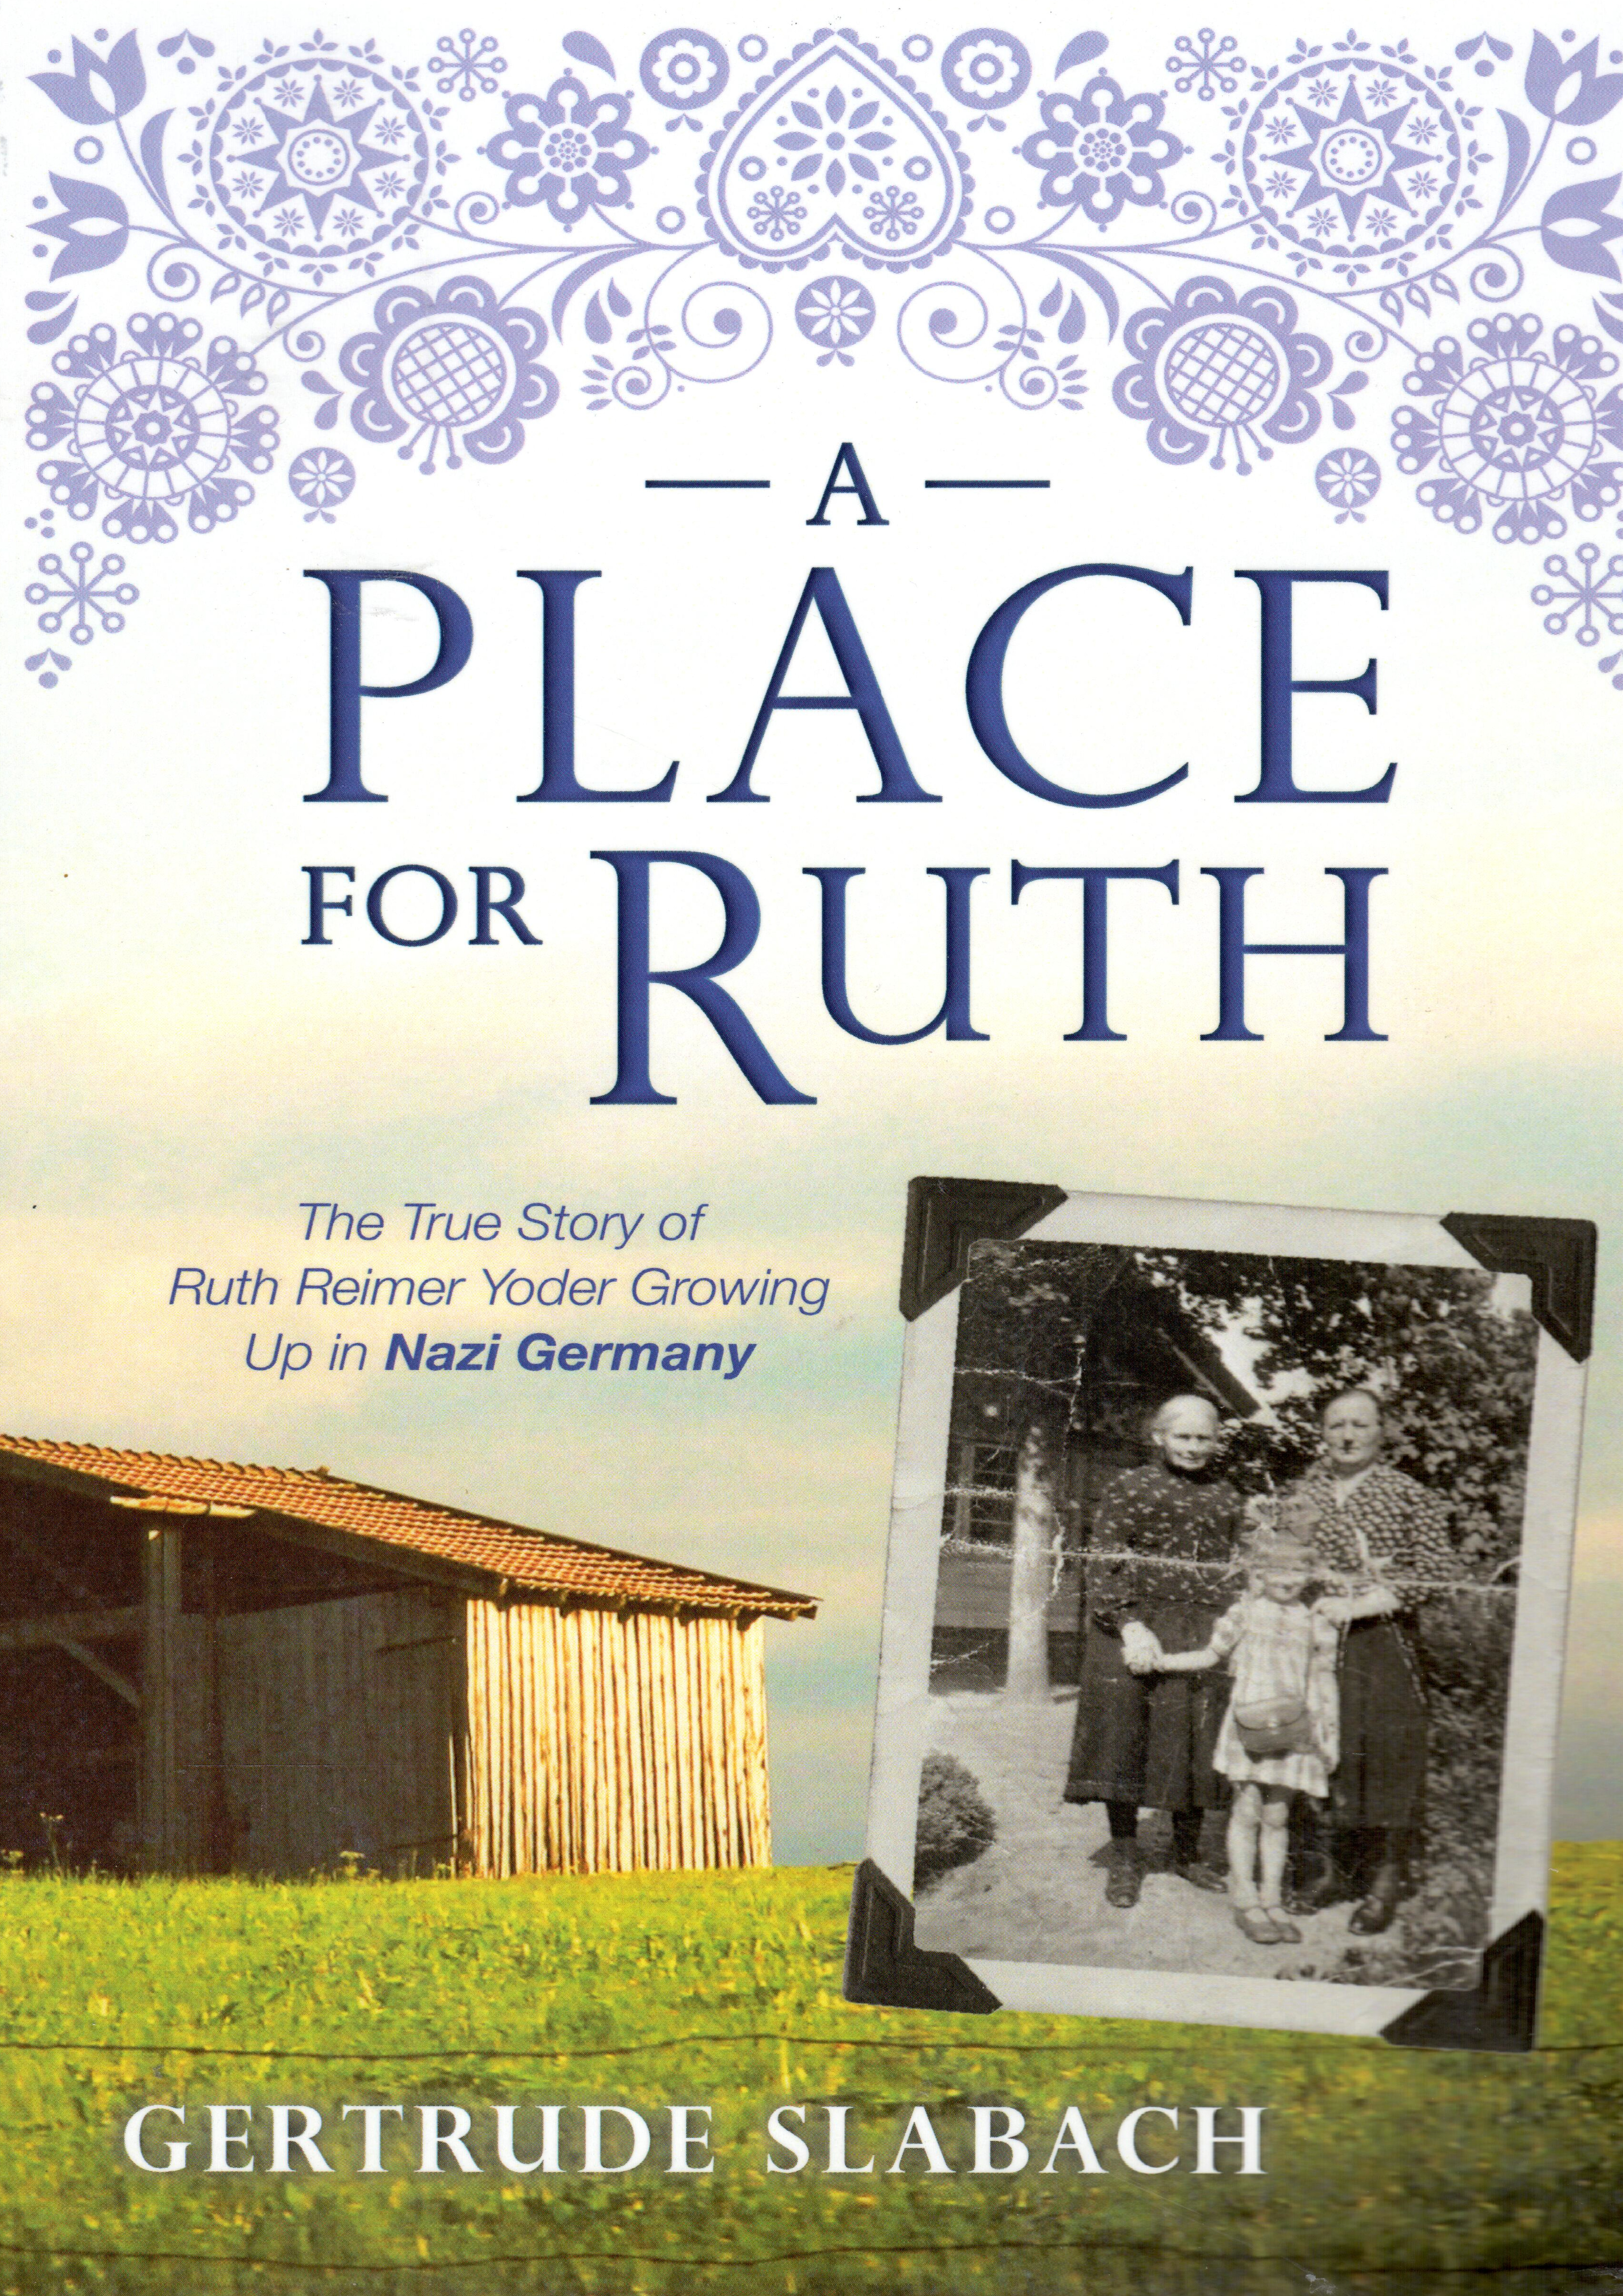 A place for Ruth